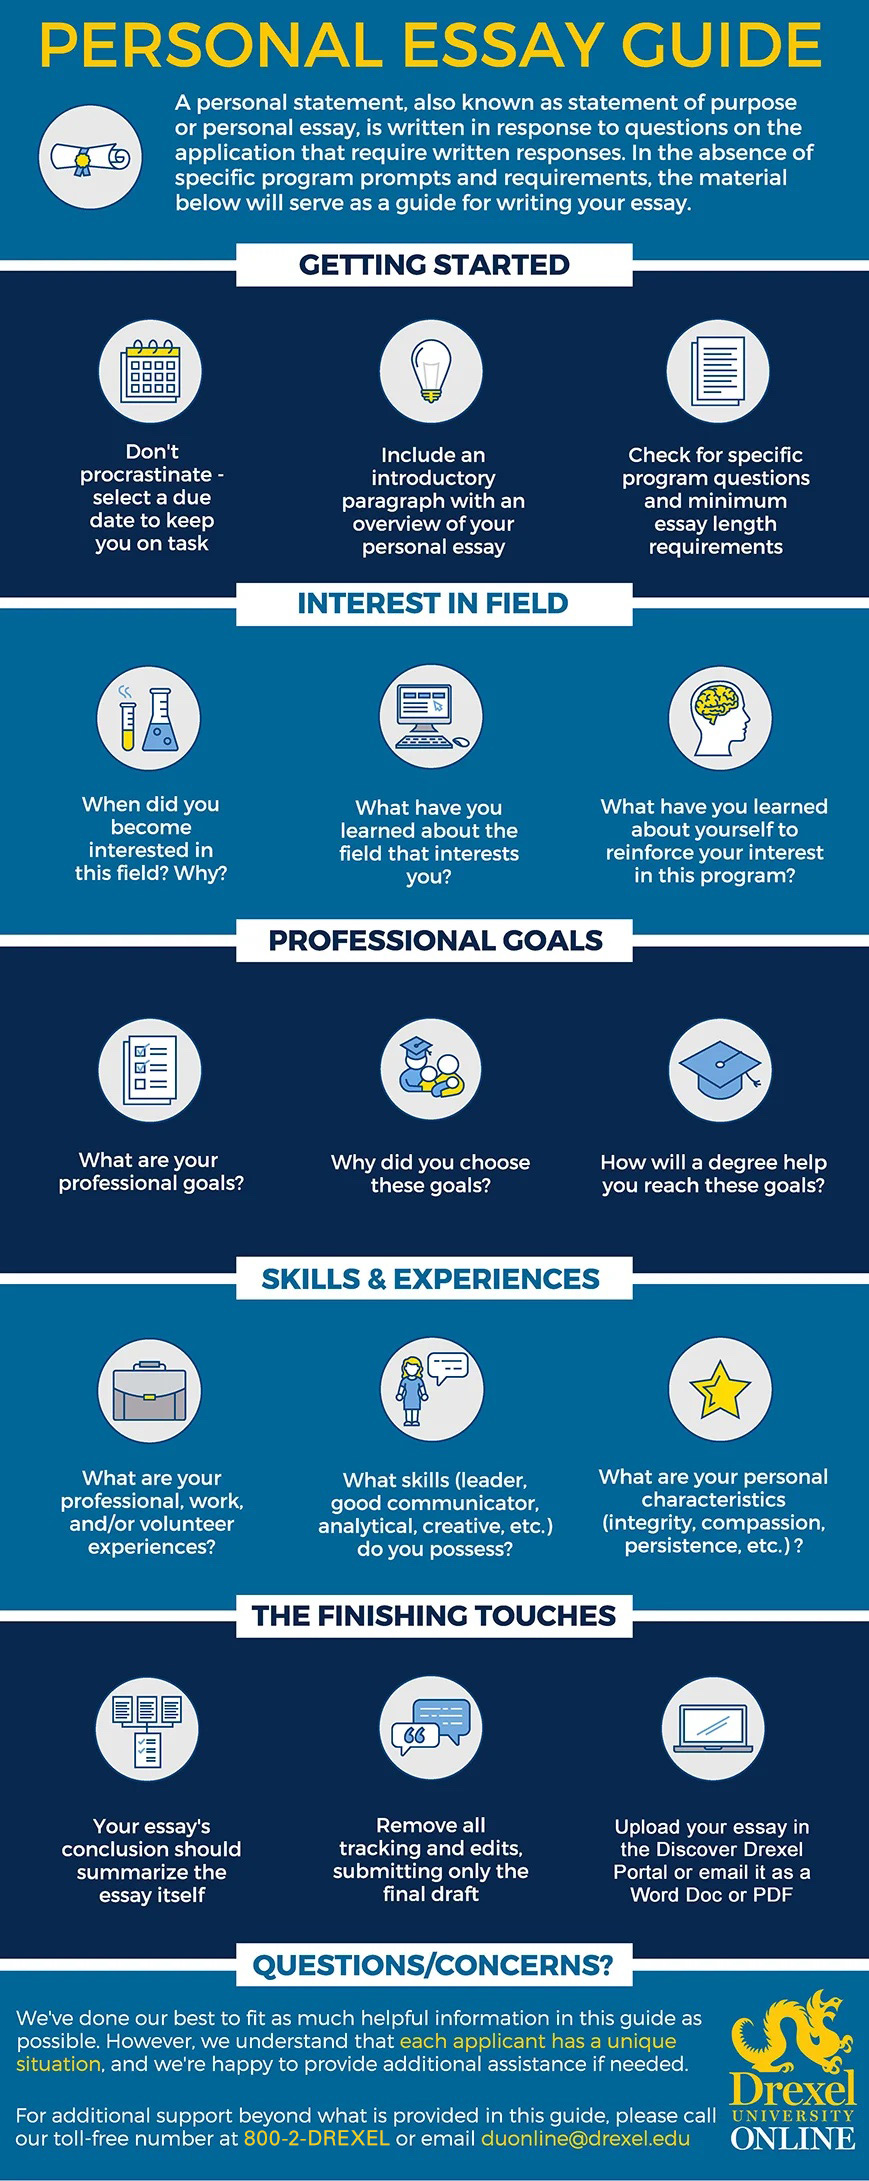 Infographic outlining tips for the perfect personal essay. Created by Drexel University Online.